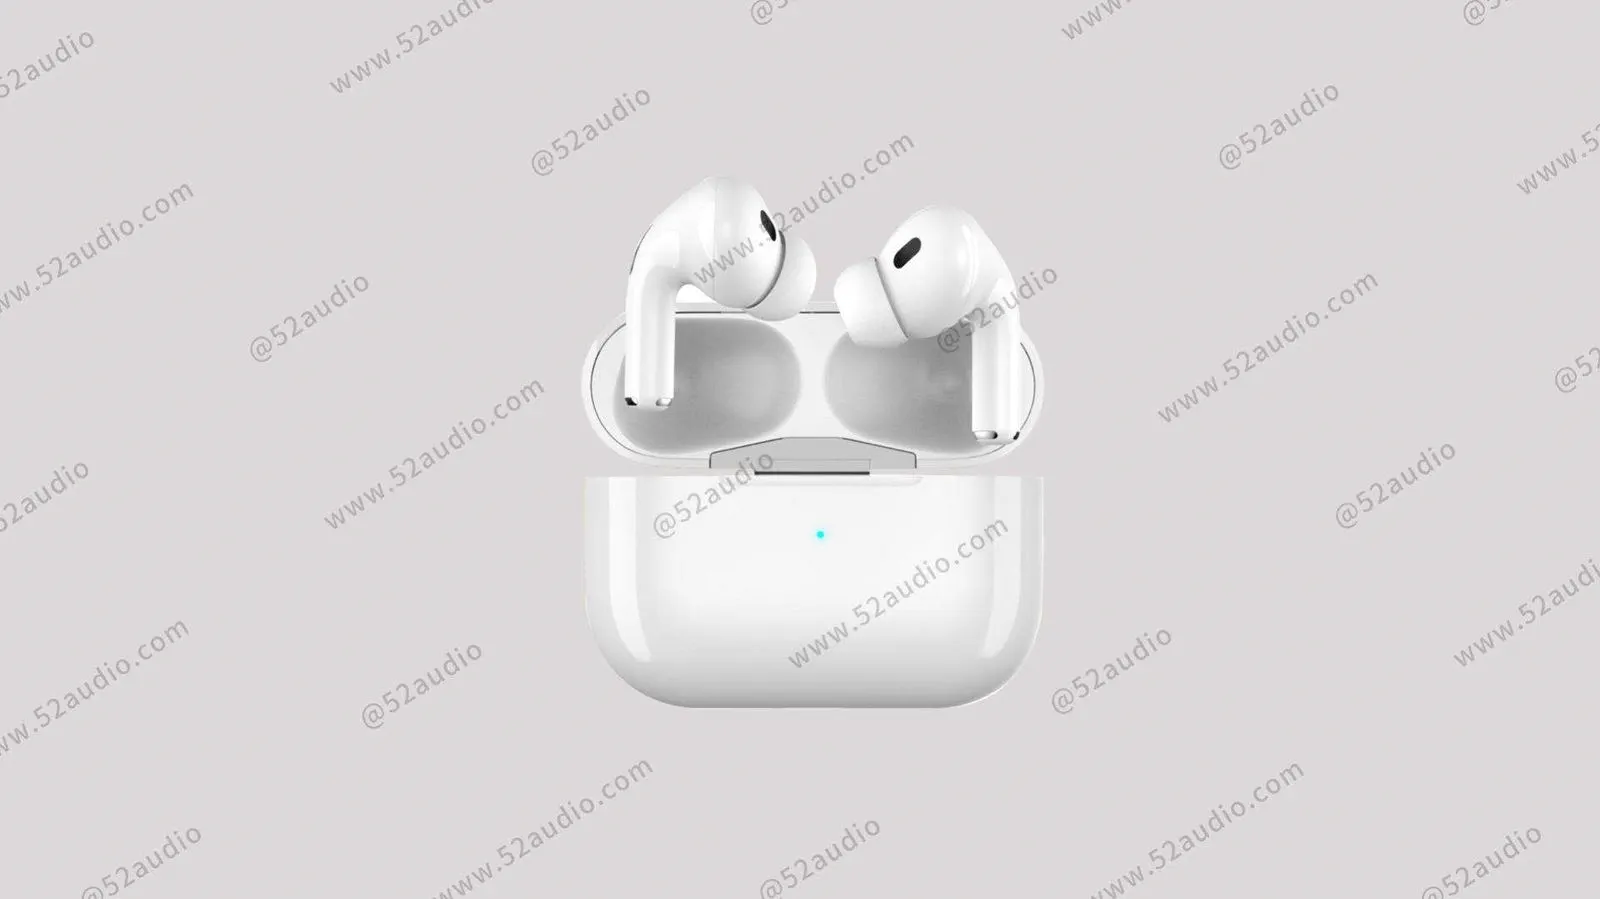 Apple AirPods 2 Pro leaked image